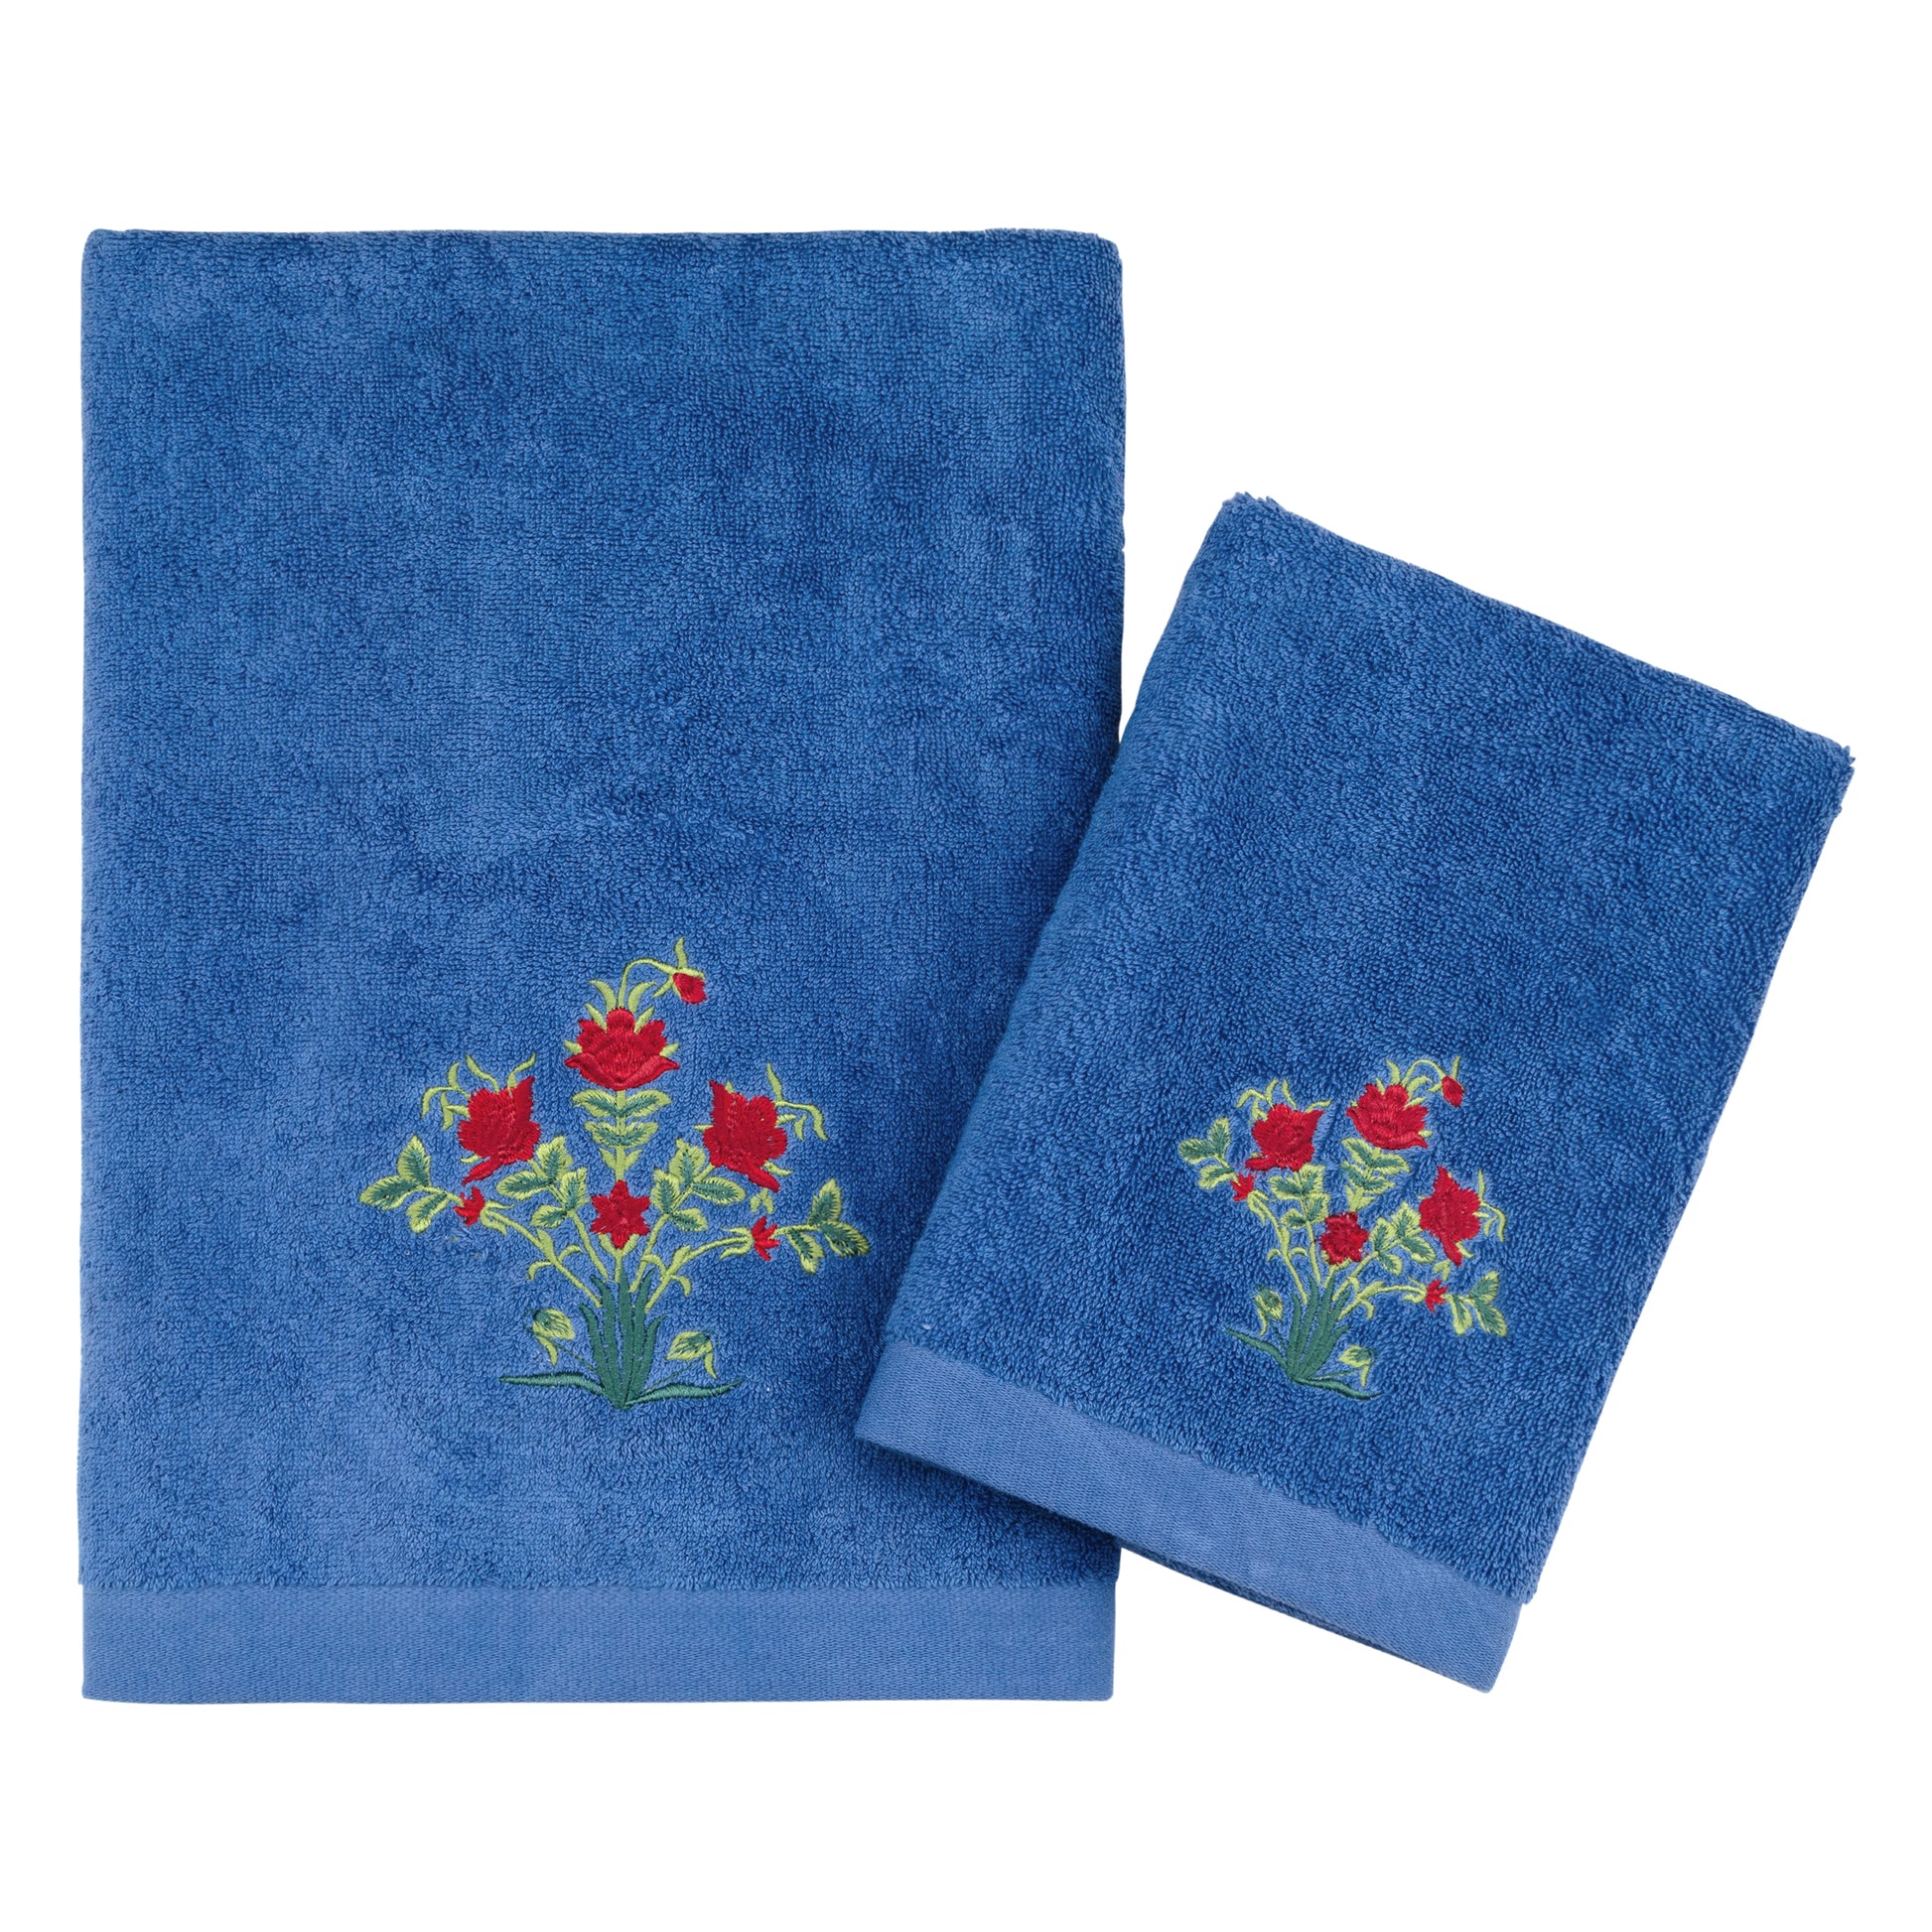 100%Cotton Embroidered towel navy, midnight, dark blue, floral, rose, luxury, spa, Terry, absorbent towel, best cotton towels. 500 gsm, GOTS, certified , Canada's best towels, America's best towels, USA best towels, best plush towels, durable towels